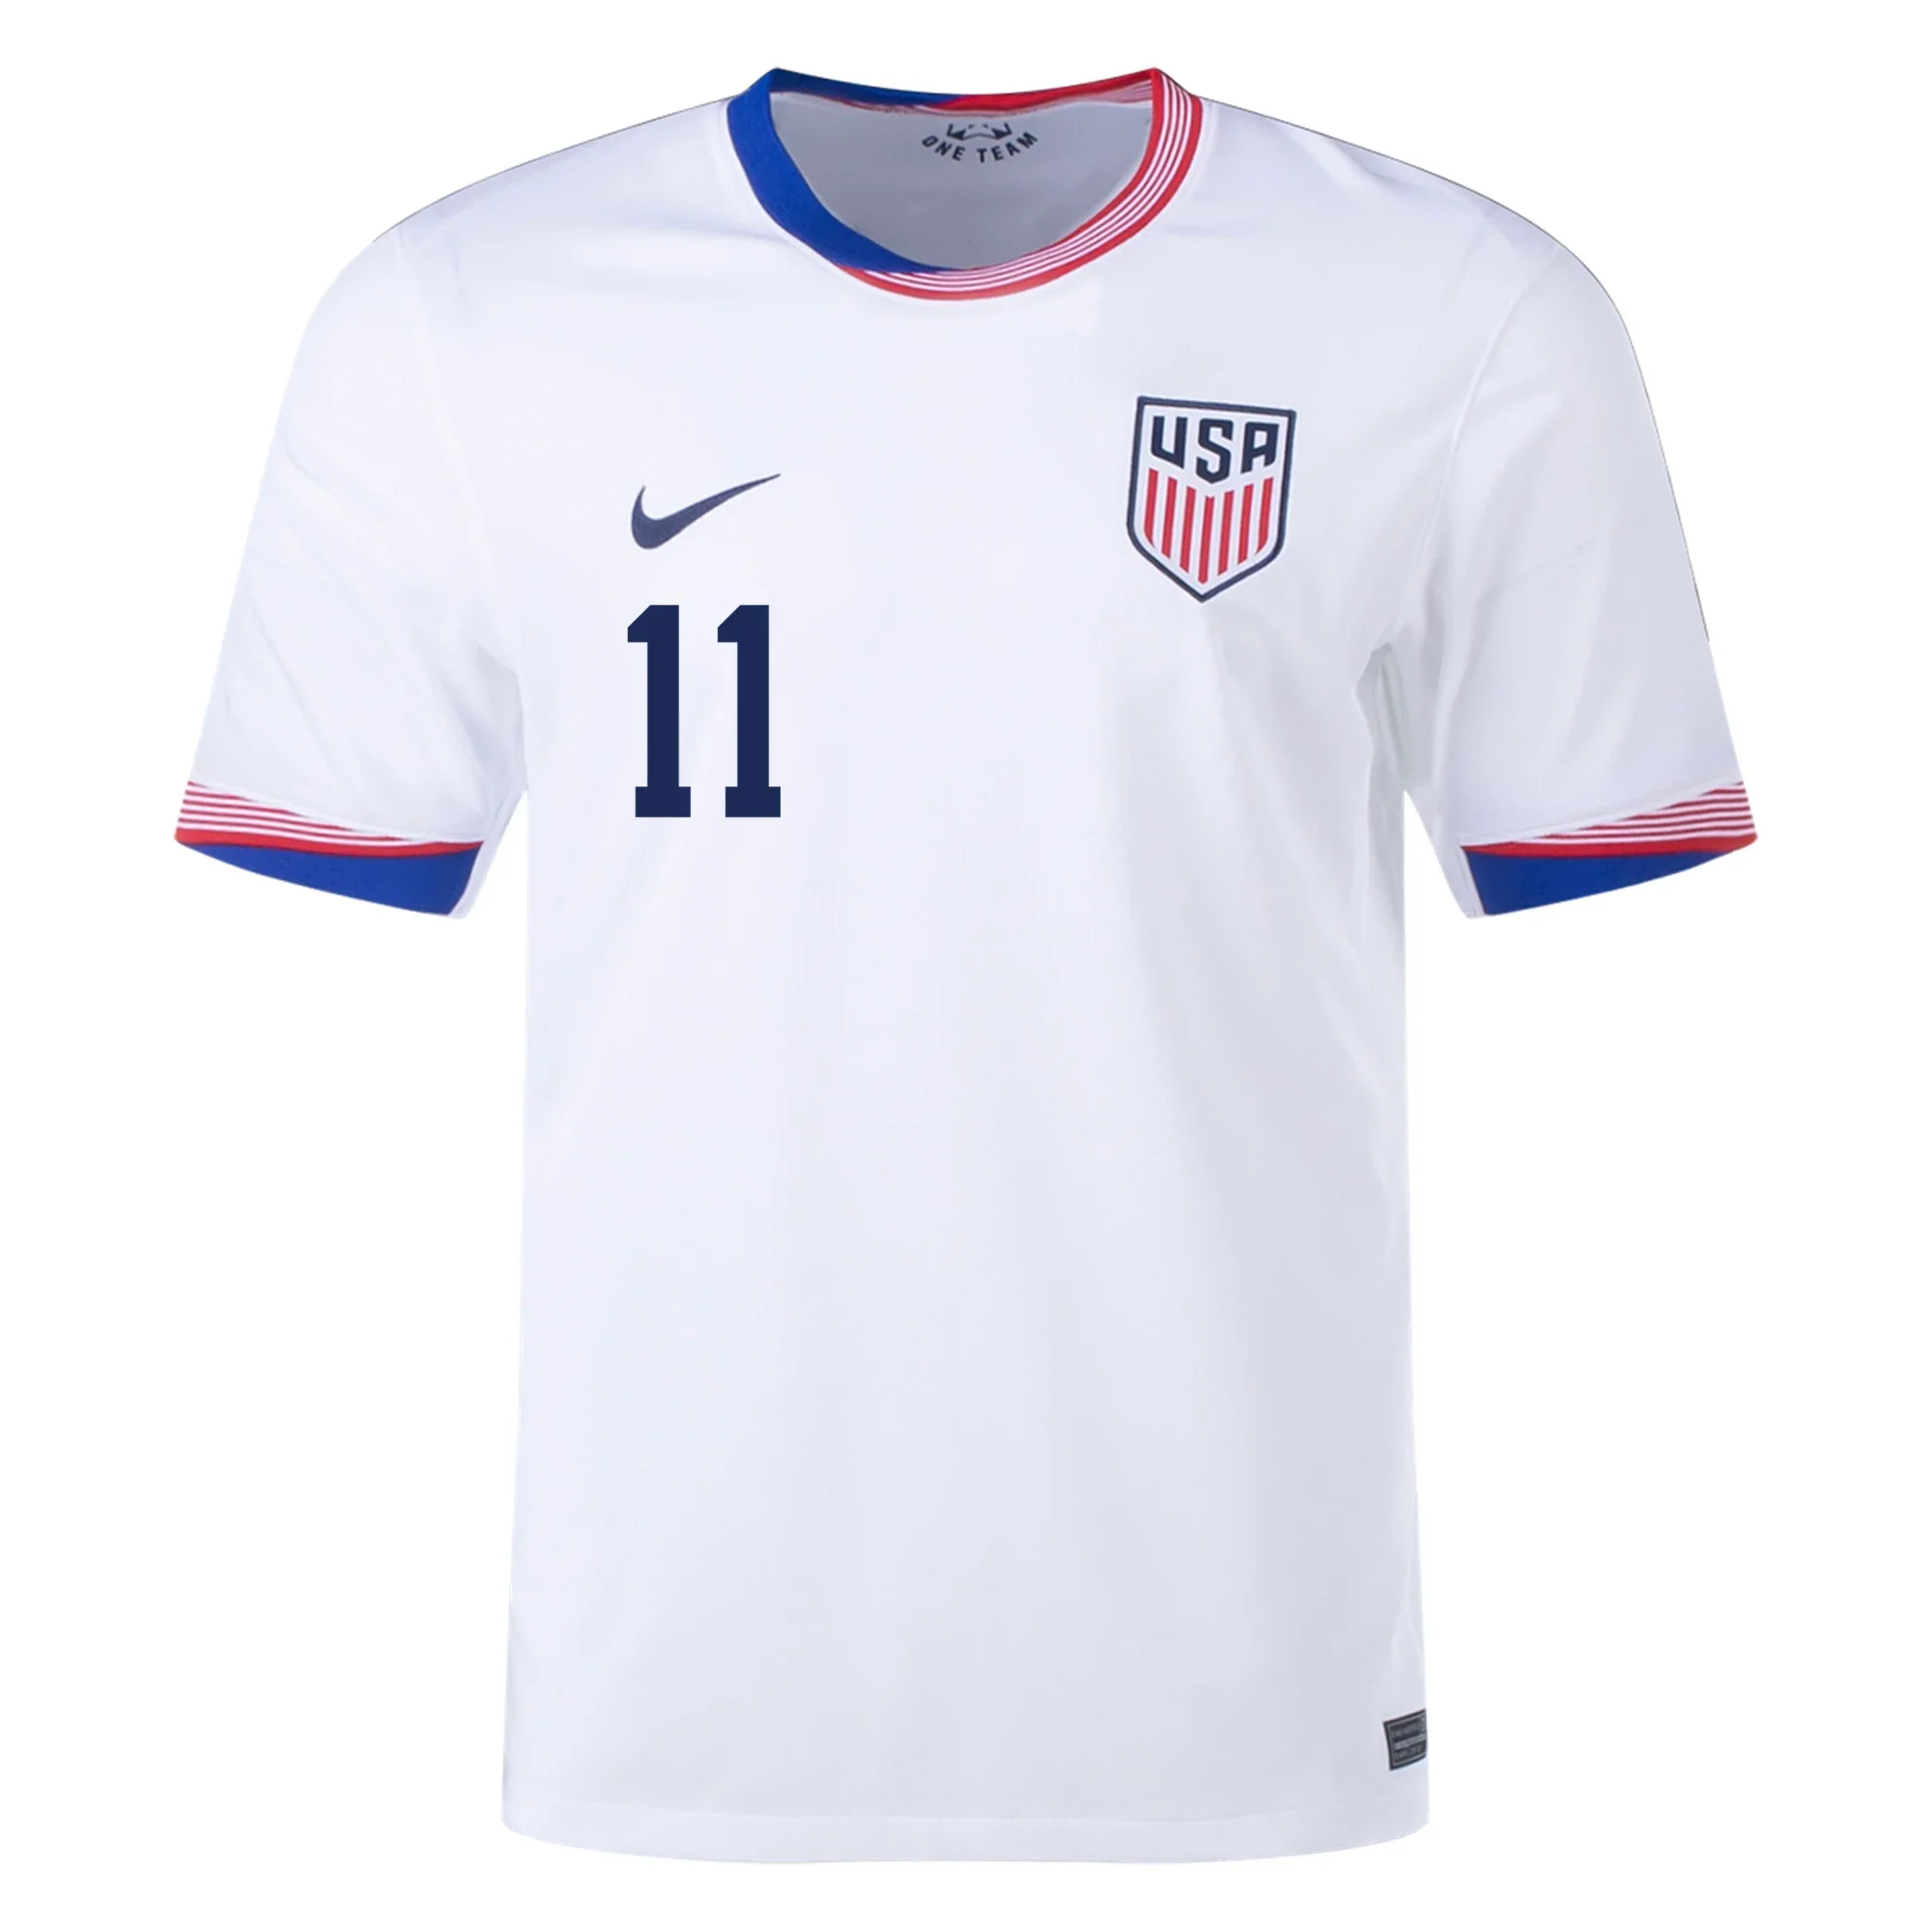 2024 United States AARONSON 11 Home Jersey